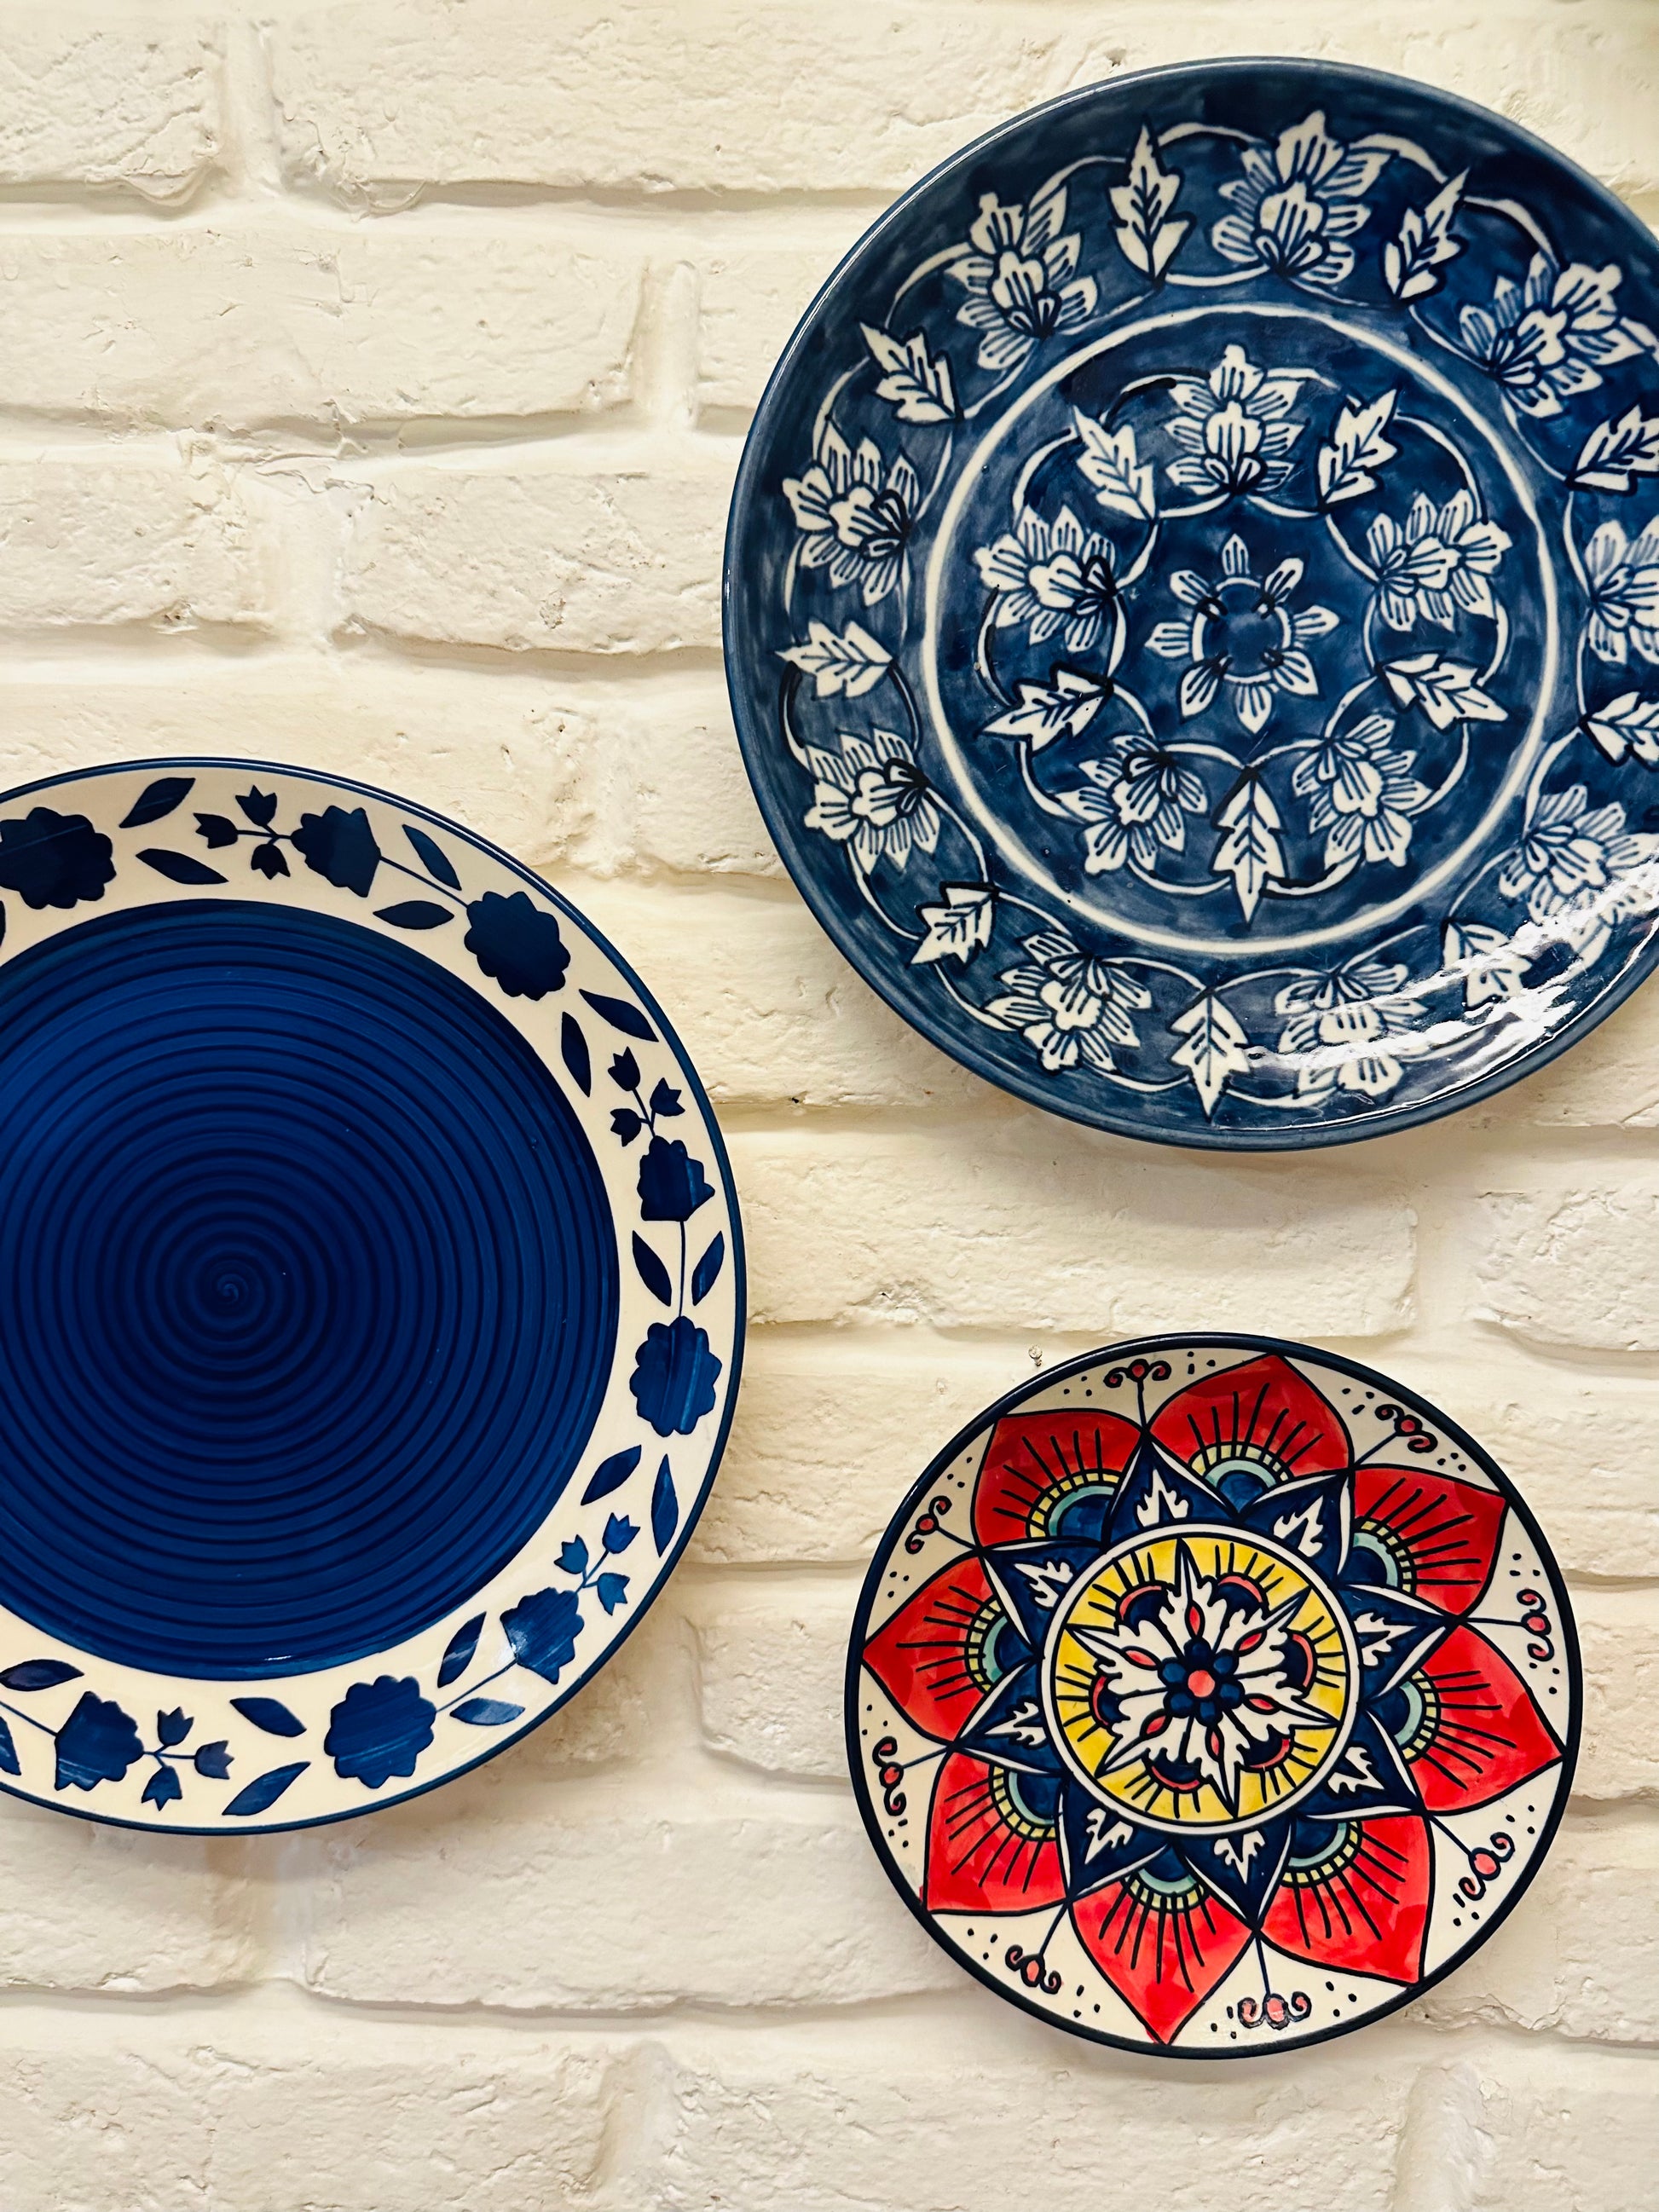  Accent Pieces, Artisanal Wall Décor, Bedroom Décor, Blue Bell Wall Plates, Classical Wall Décor, Decorative Wall Plates, Hand Painted Wall Plates, Handcrafted Home Accessories, Handcrafted Wall Plates, High-Quality Wall Plates, Home Accent Pieces, Home Decor Ensemble, Indian Artisan Craftsmanship, Indian Artisan Wall Plates, Living Room Décor, Unique Wall Décor, Vibrant Wall Décor, Wall Plate Hook, Wall Plate Set, tesu